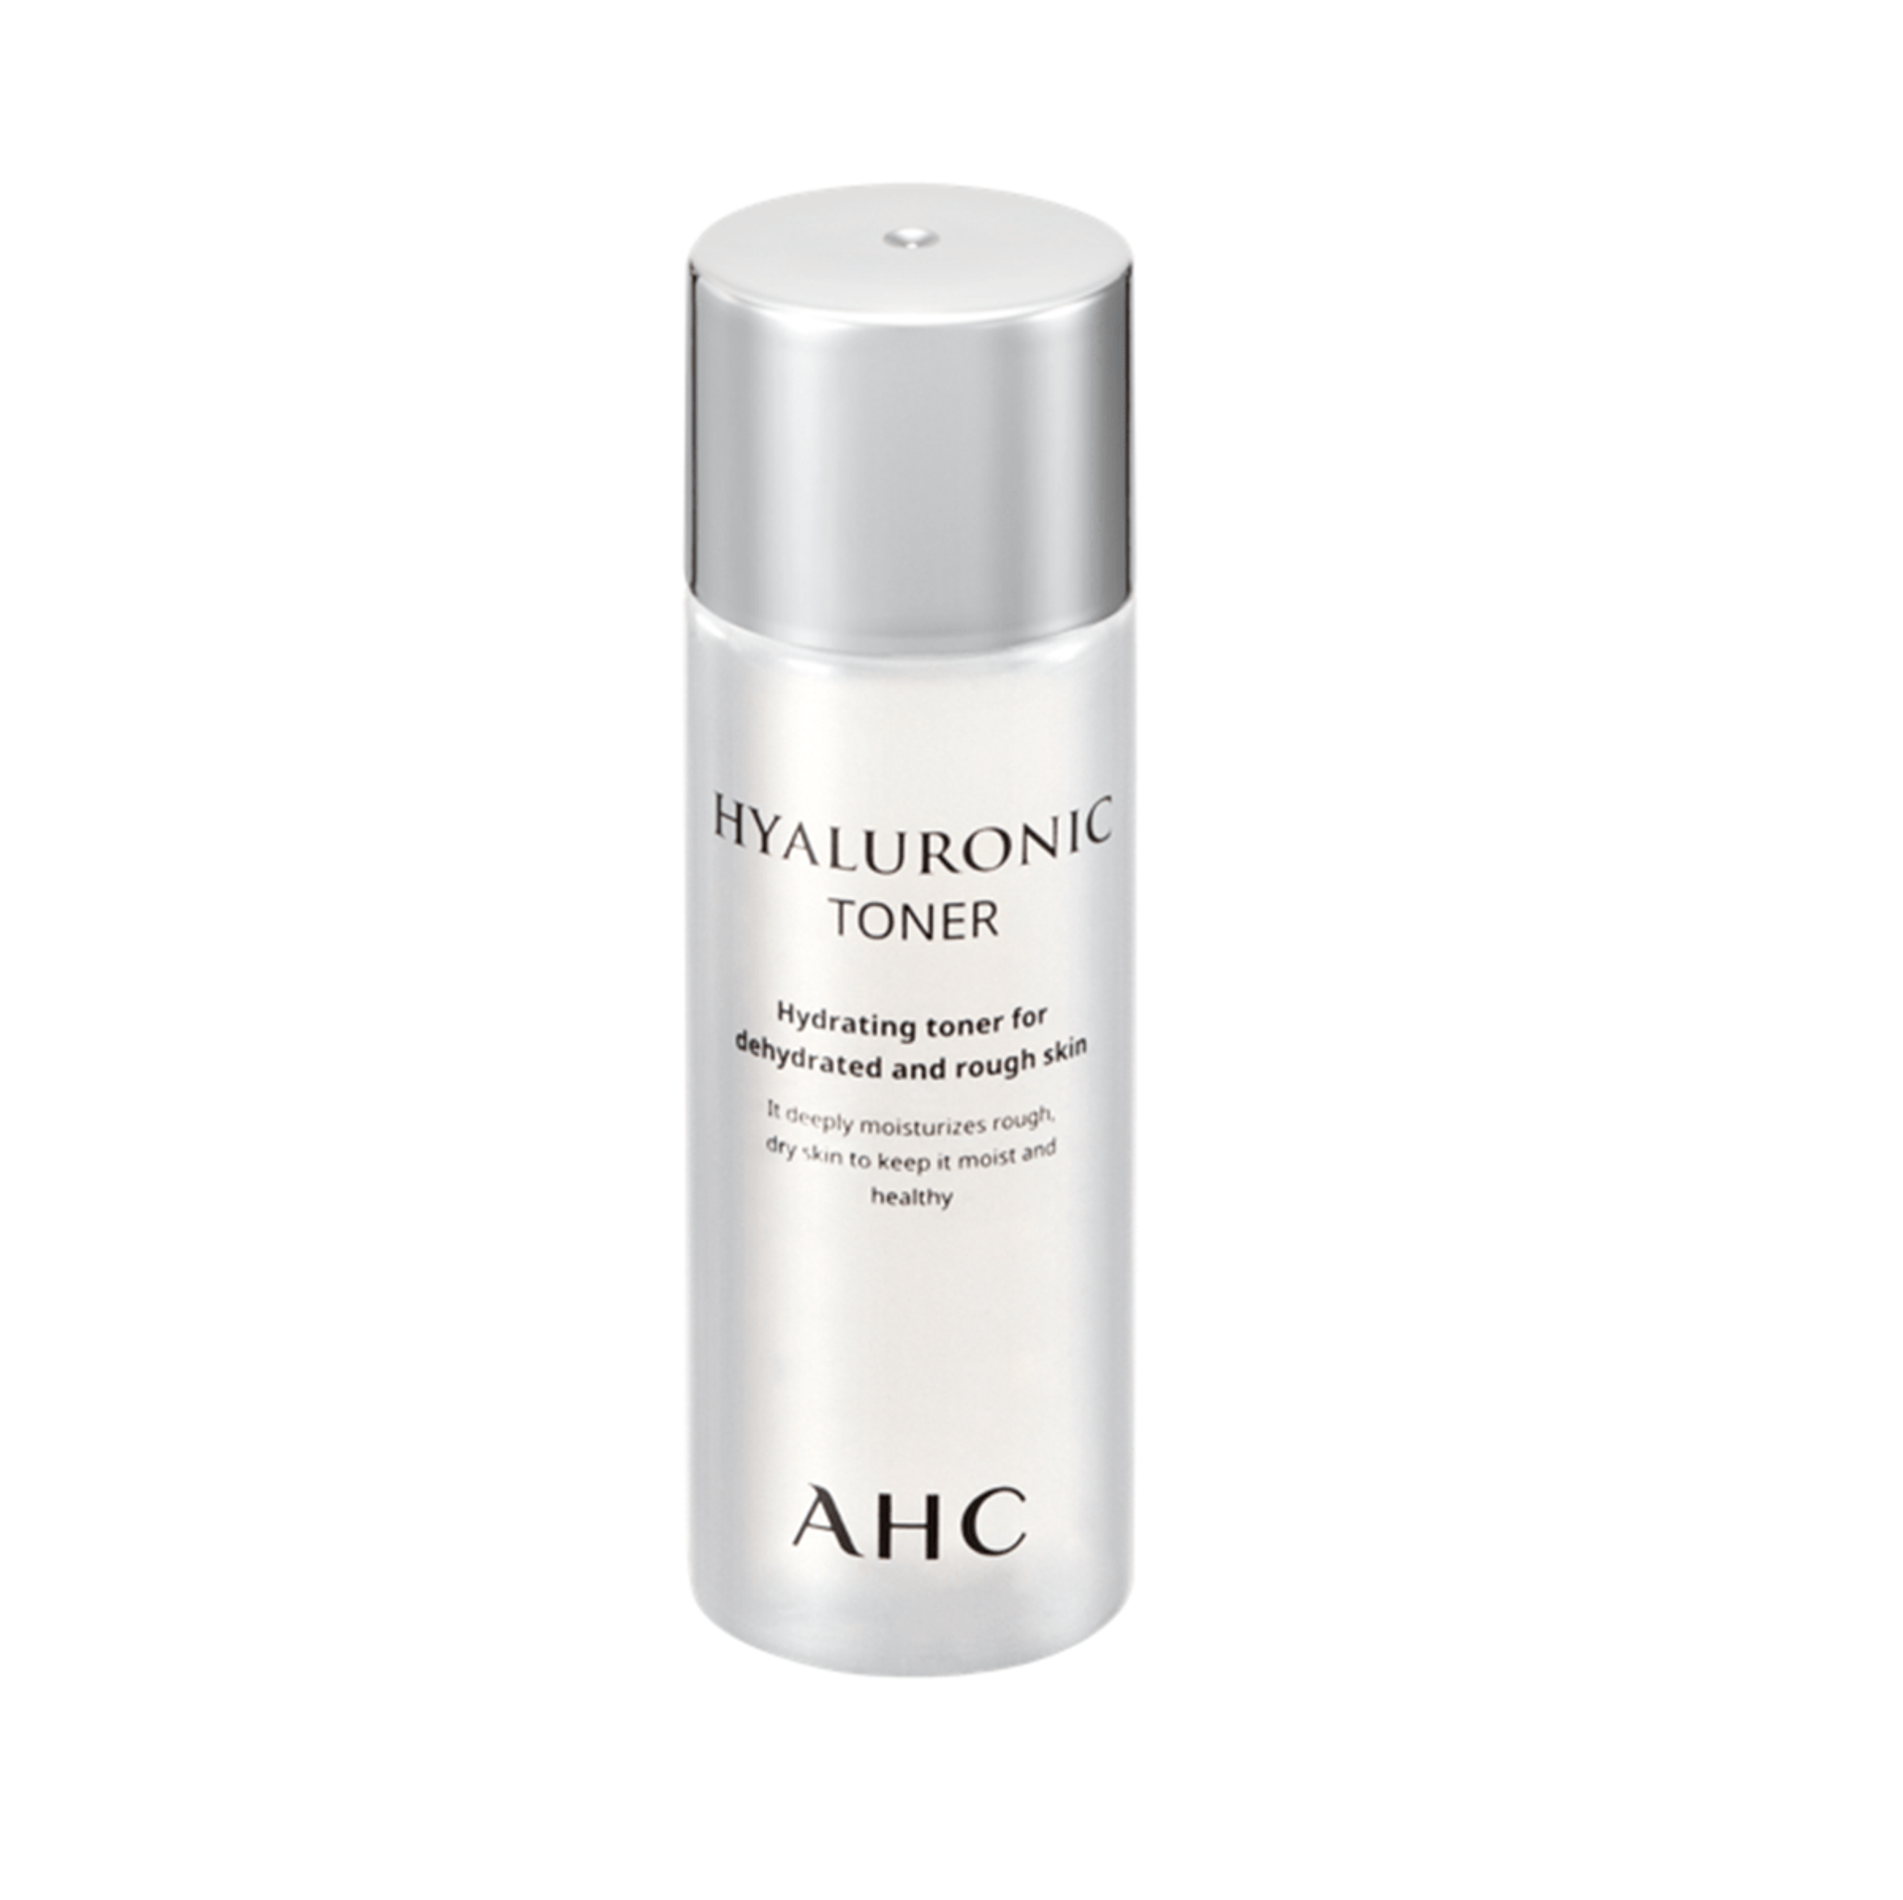 gwp-nuoc-can-bang-ahc-hyaluronic-toner-30ml-2